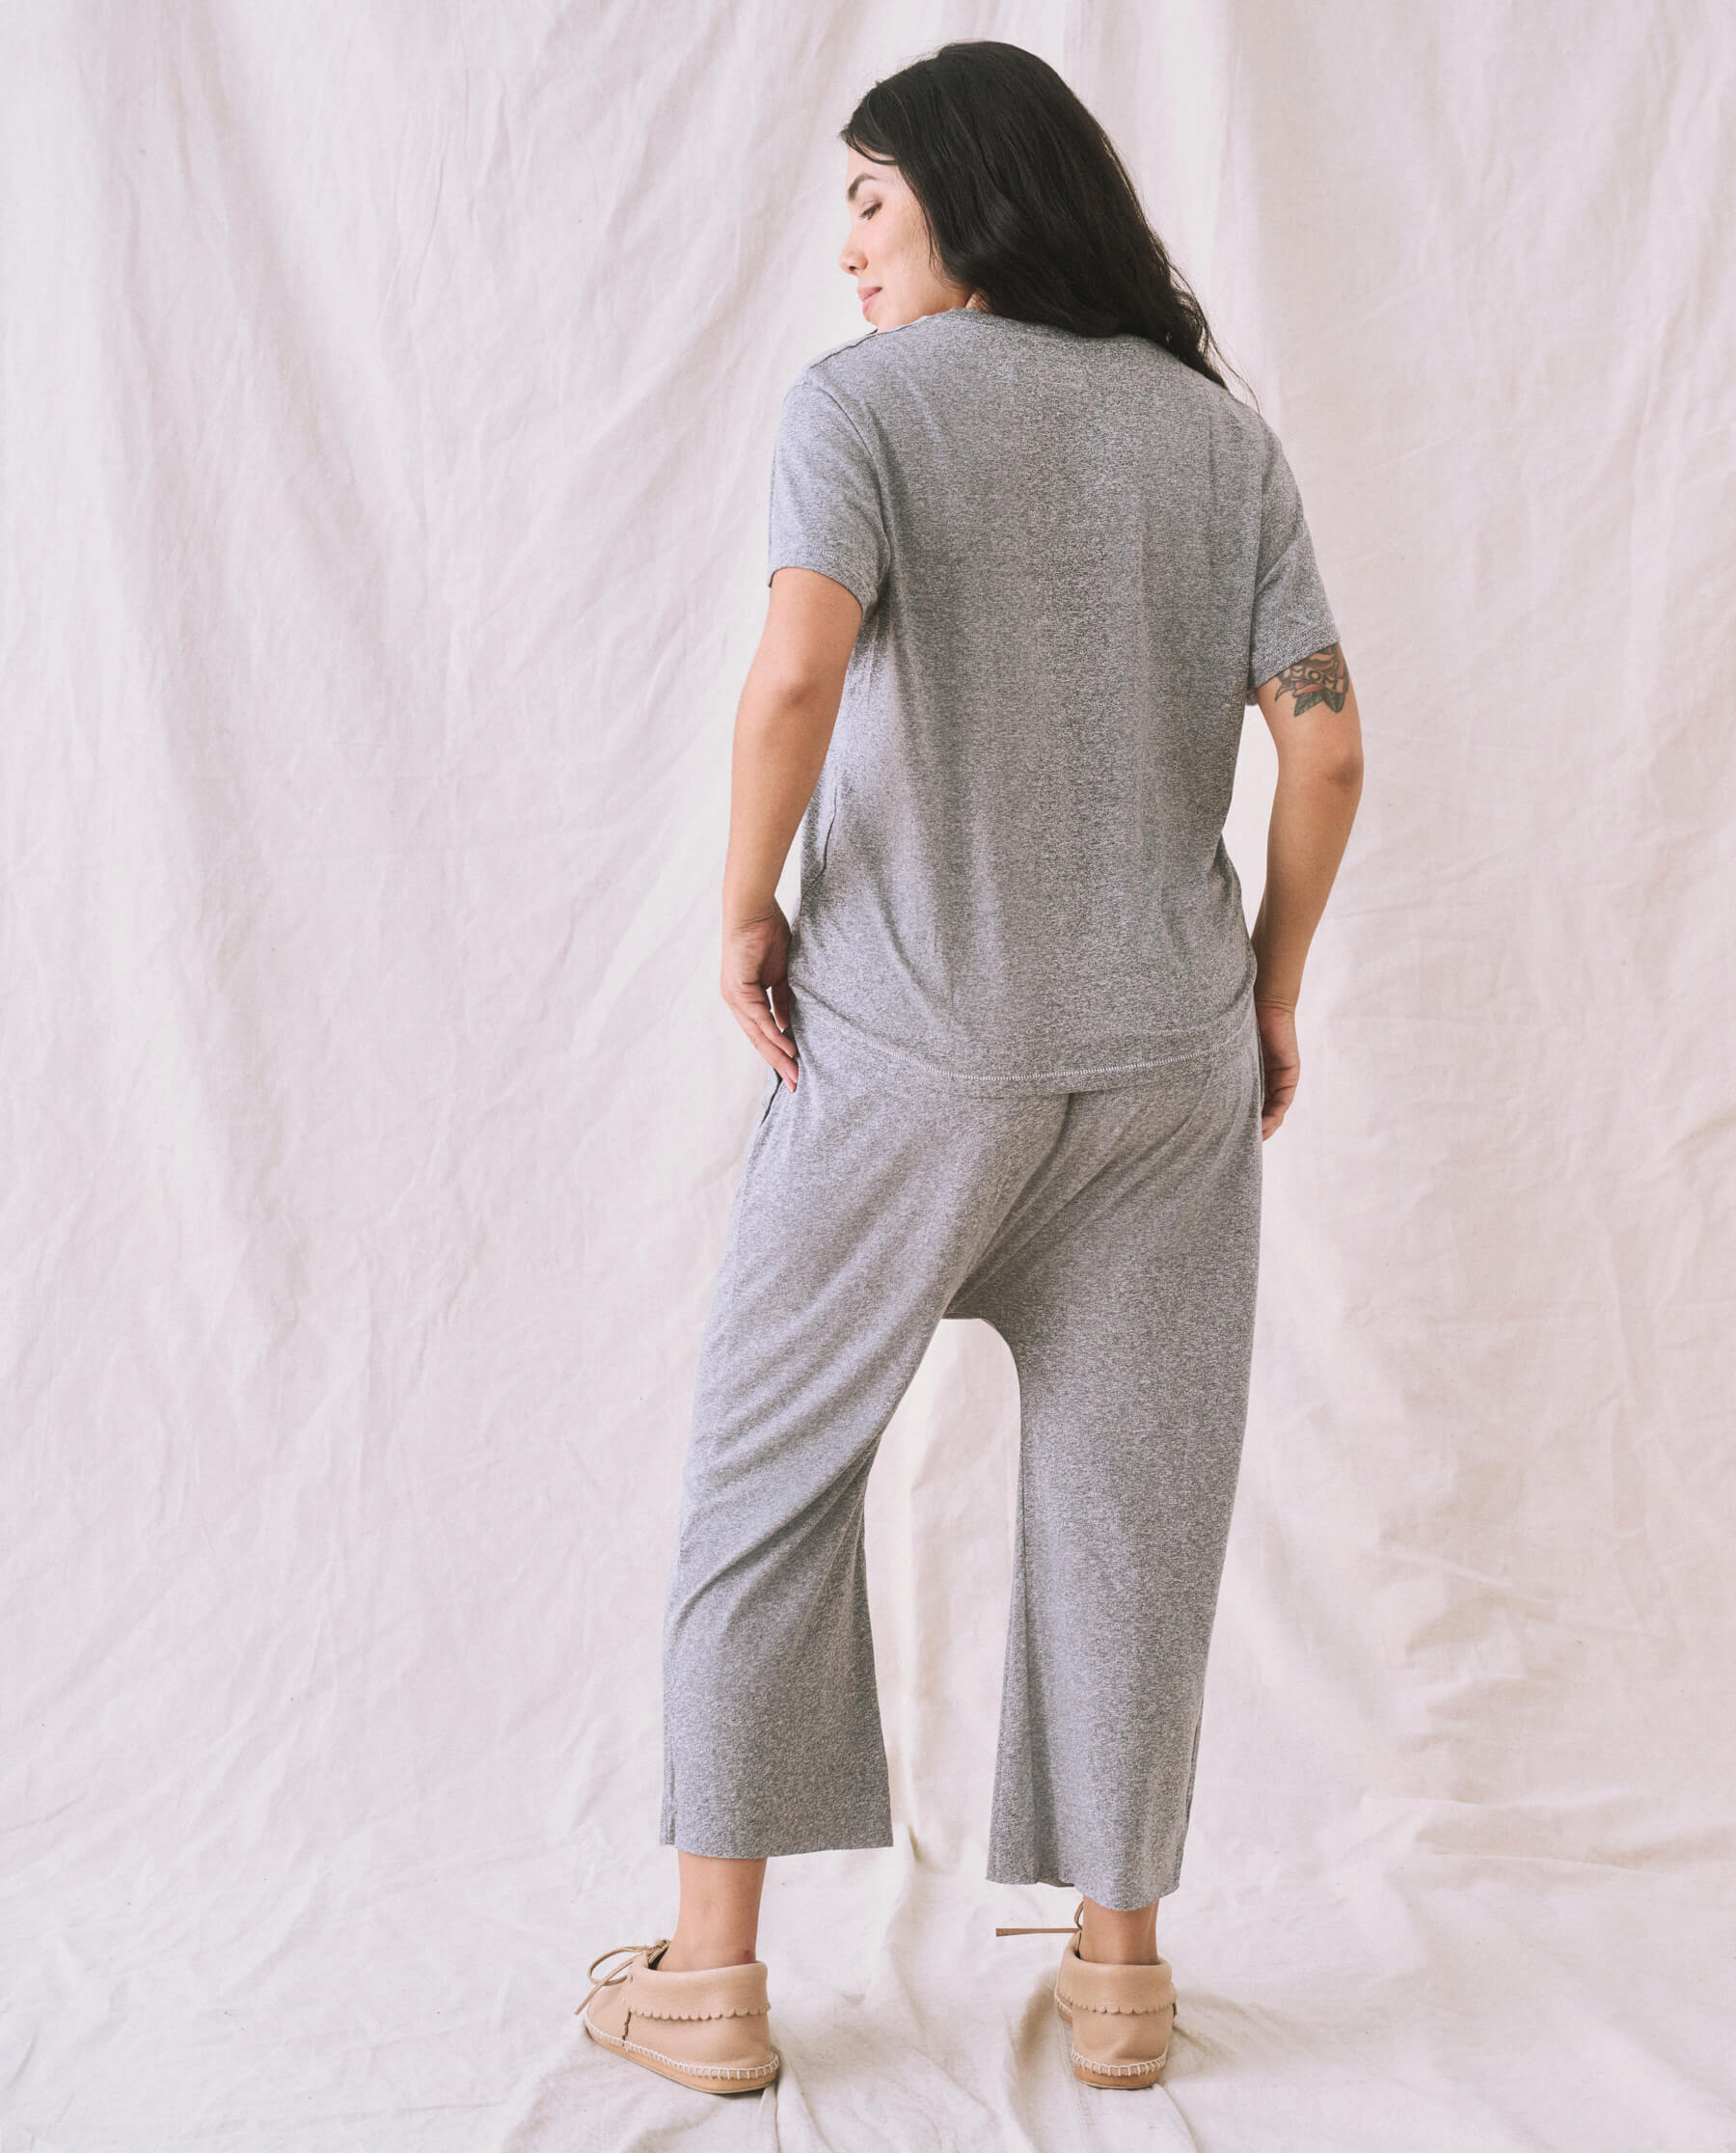 The Jersey Crop. -- Heather Grey SWEATPANTS THE GREAT. CORE KNITS